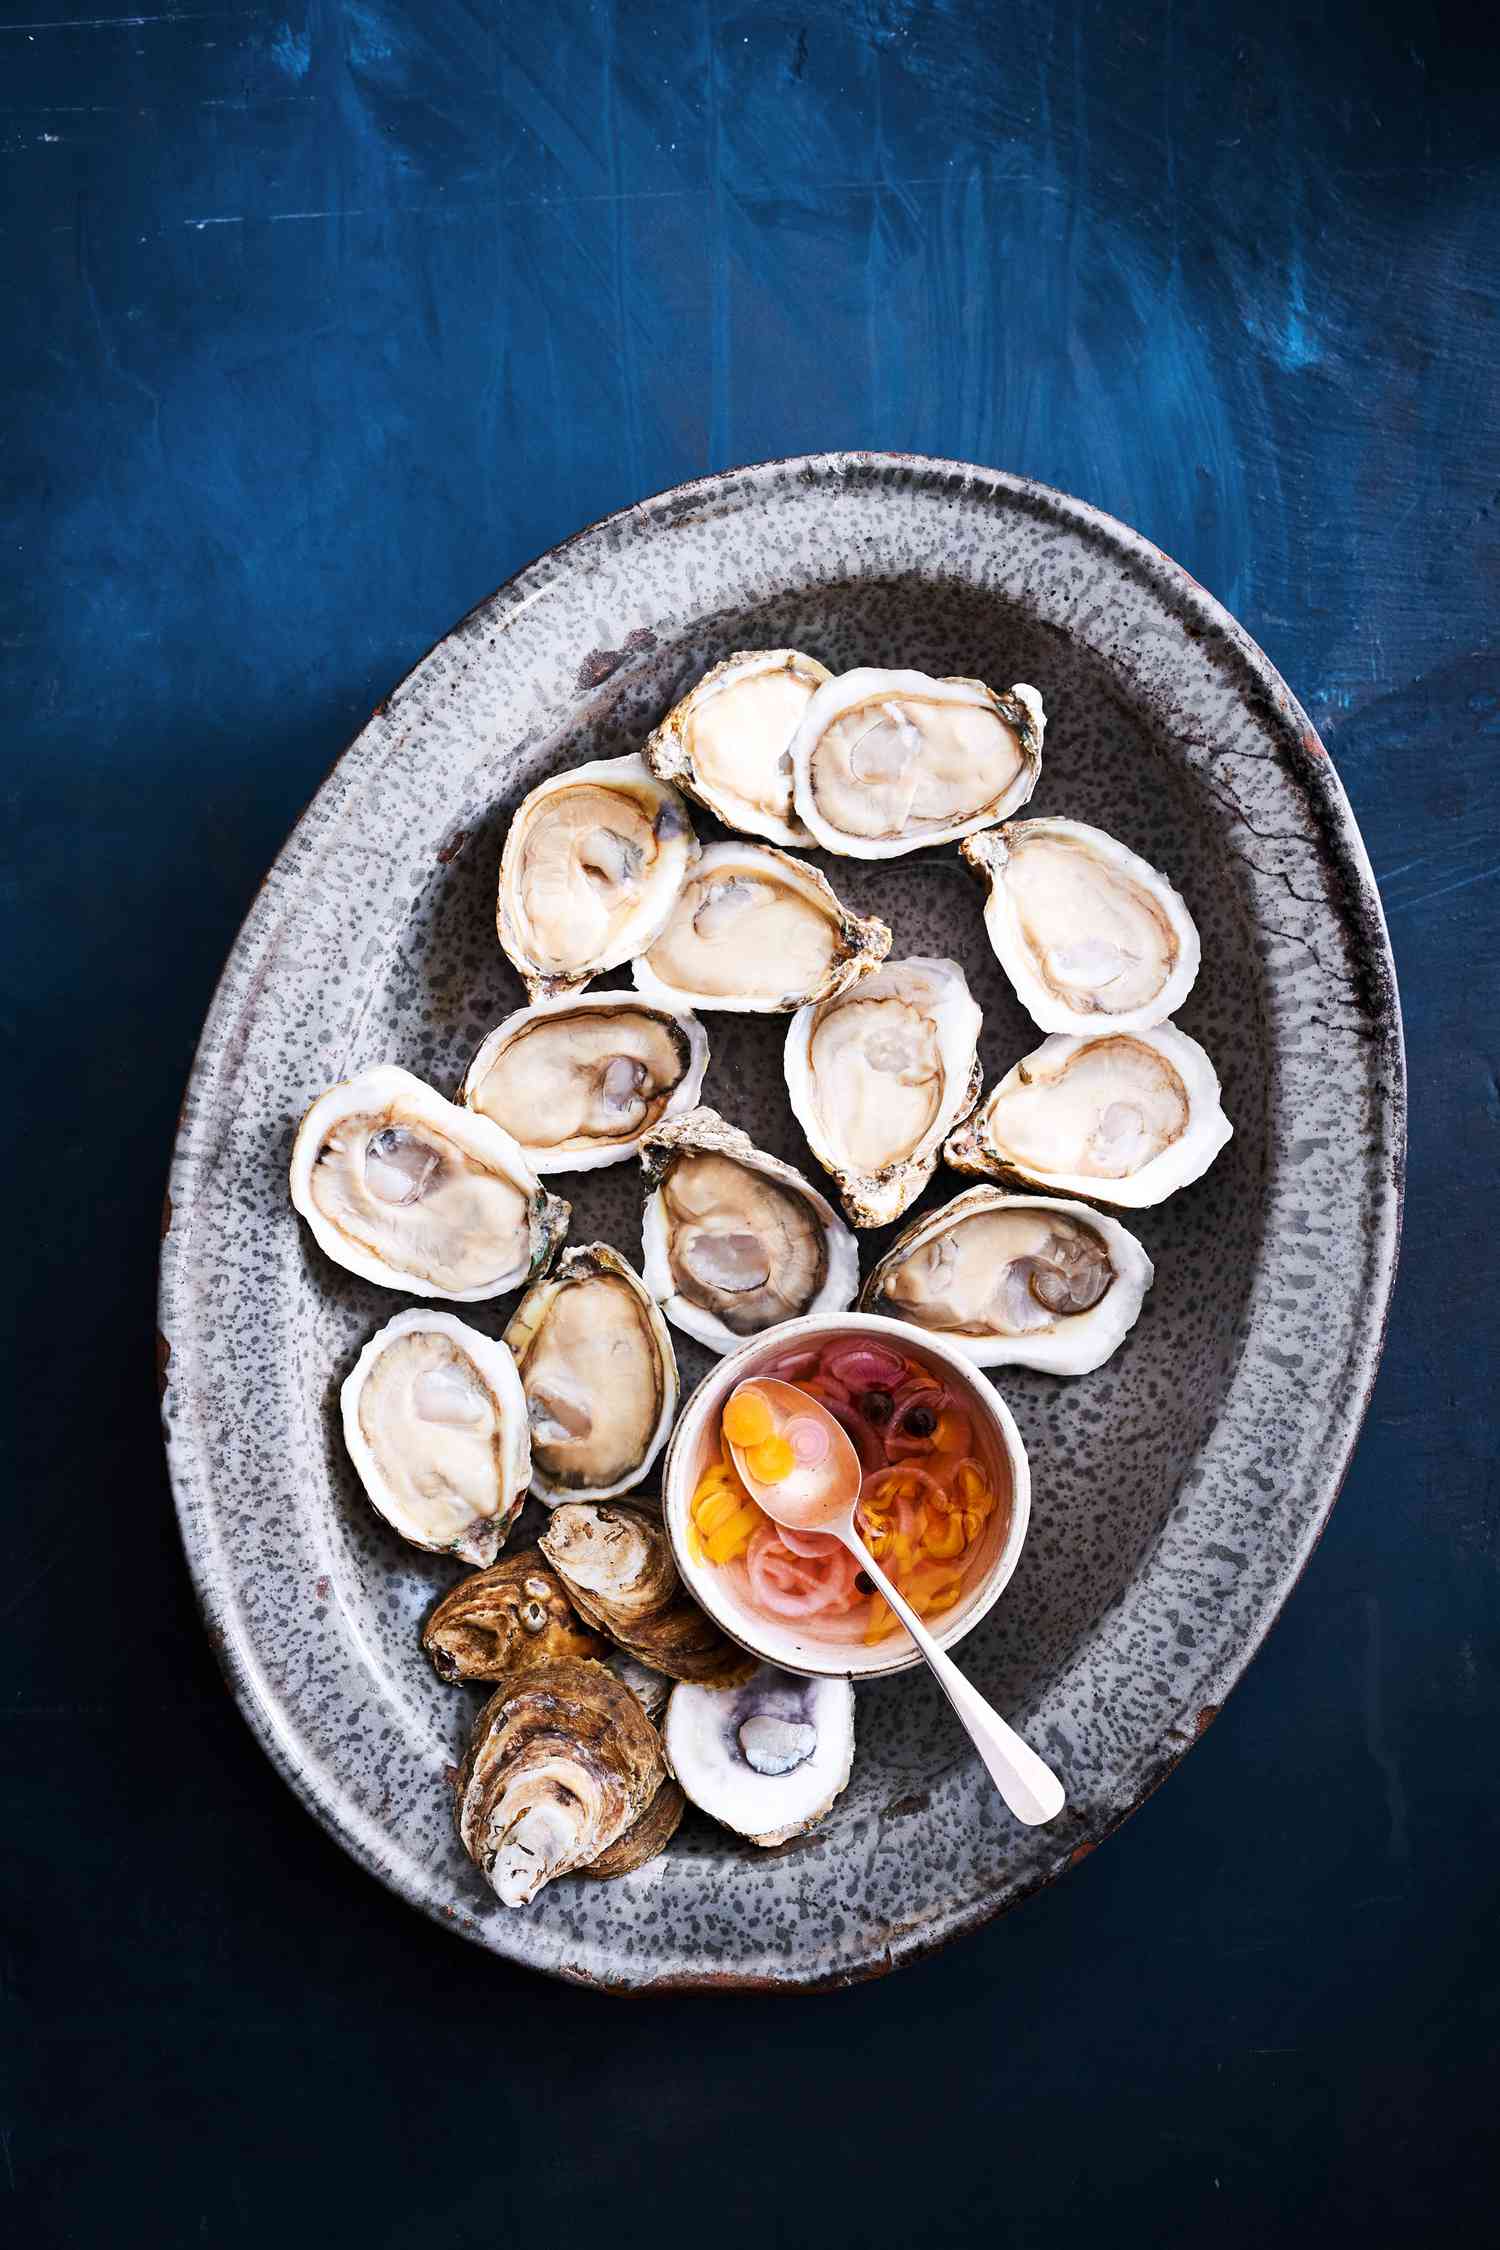 How to Buy, Store, and Shuck Oysters